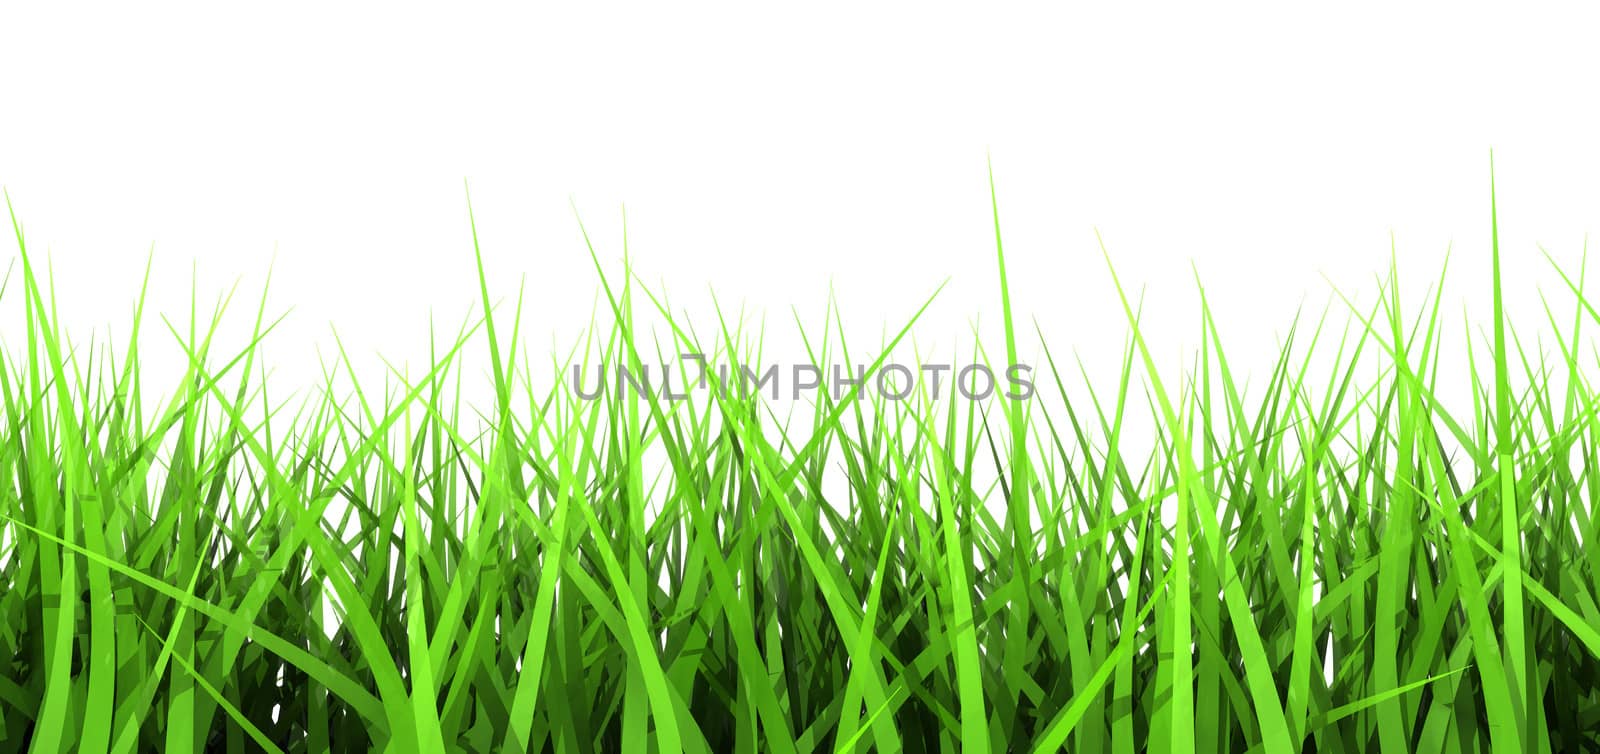 Green Grass On White Background by klss